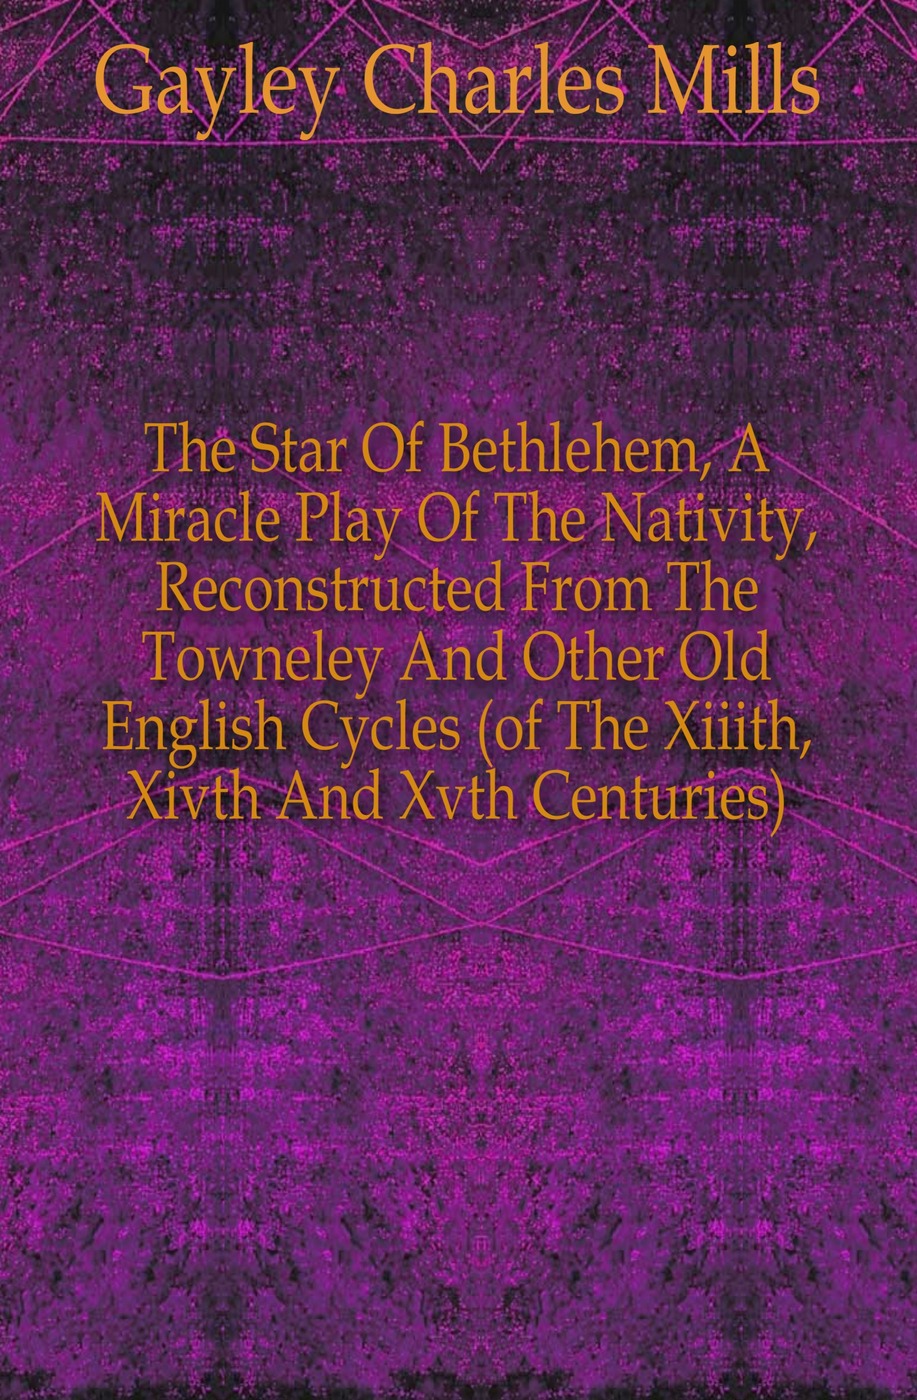 The Star Of Bethlehem, A Miracle Play Of The Nativity, Reconstructed From The Towneley And Other Old English Cycles (of The Xiiith, Xivth And Xvth Centuries)